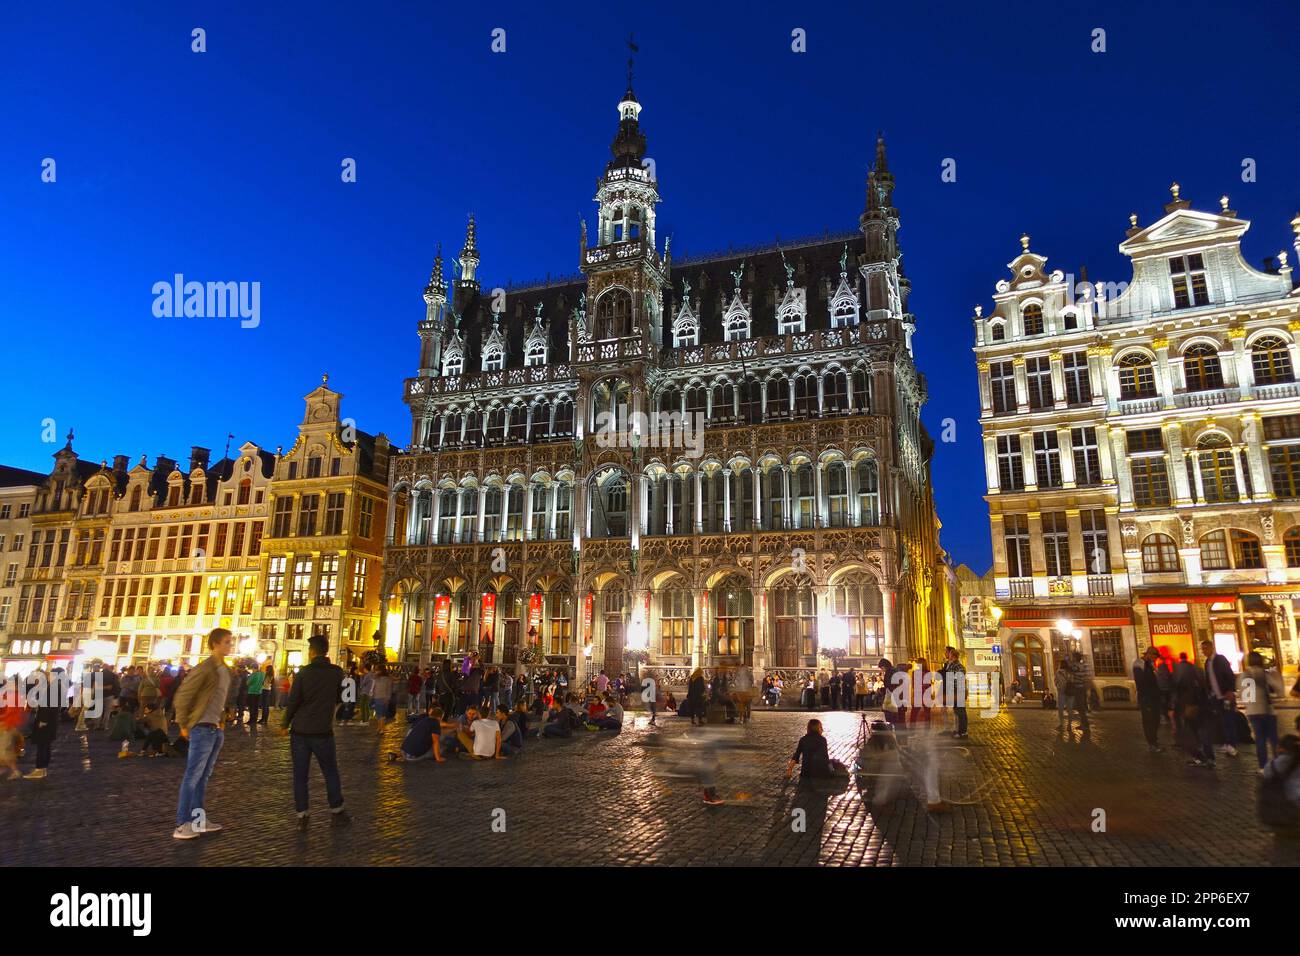 BRUSSELS, BELGIUM - AUGUST 4, 2016: The medieval city square Grand Place or Grote Markt of Brussels, UNESCO World Heritage. Stock Photo